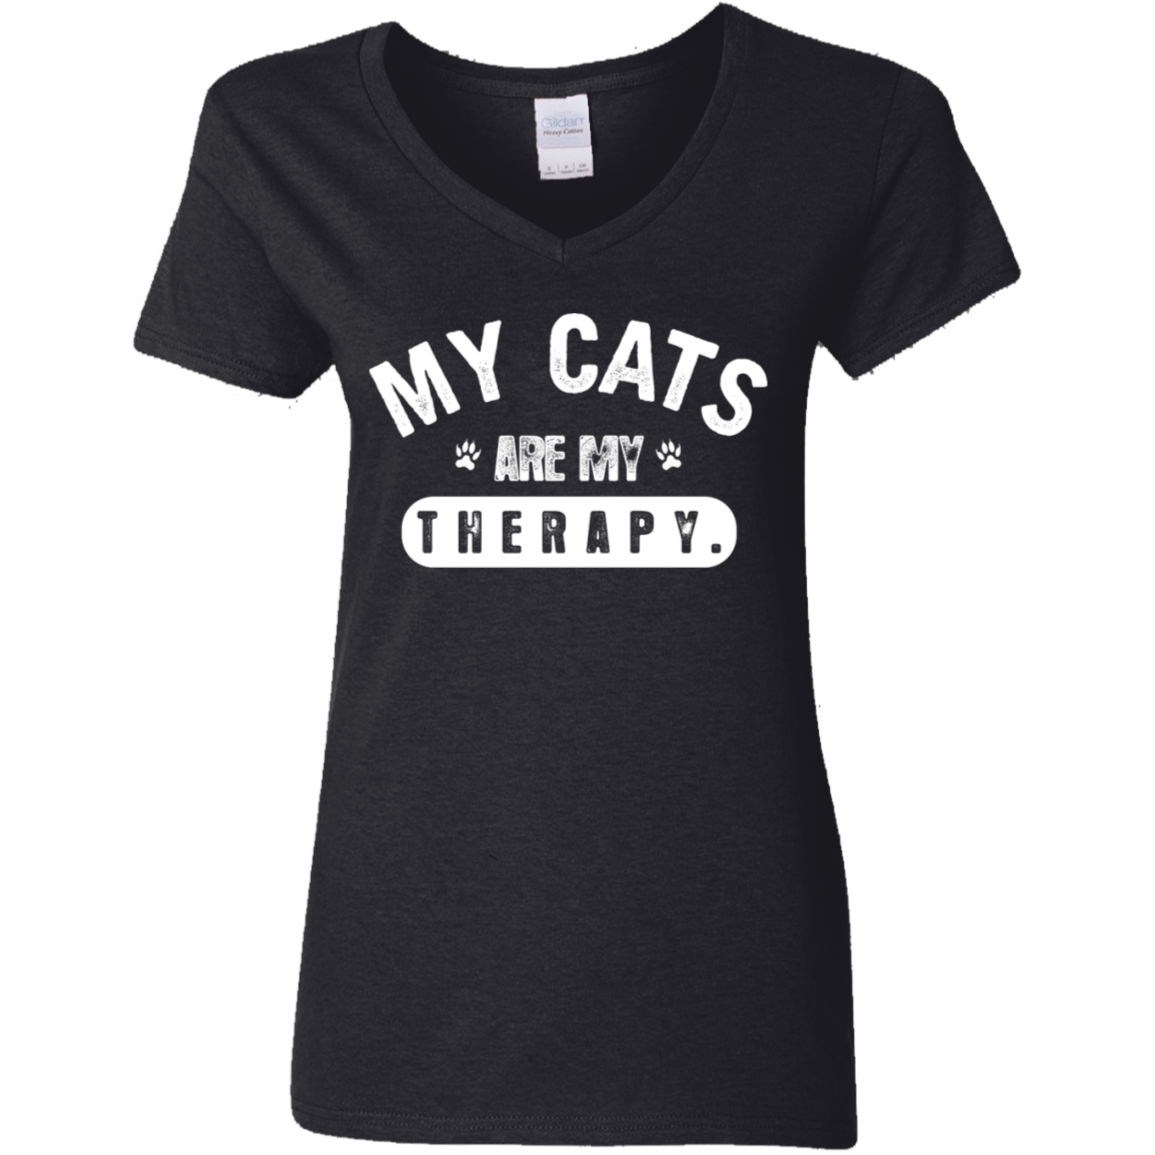 My Cats Are My Therapy - Ladies V Neck.